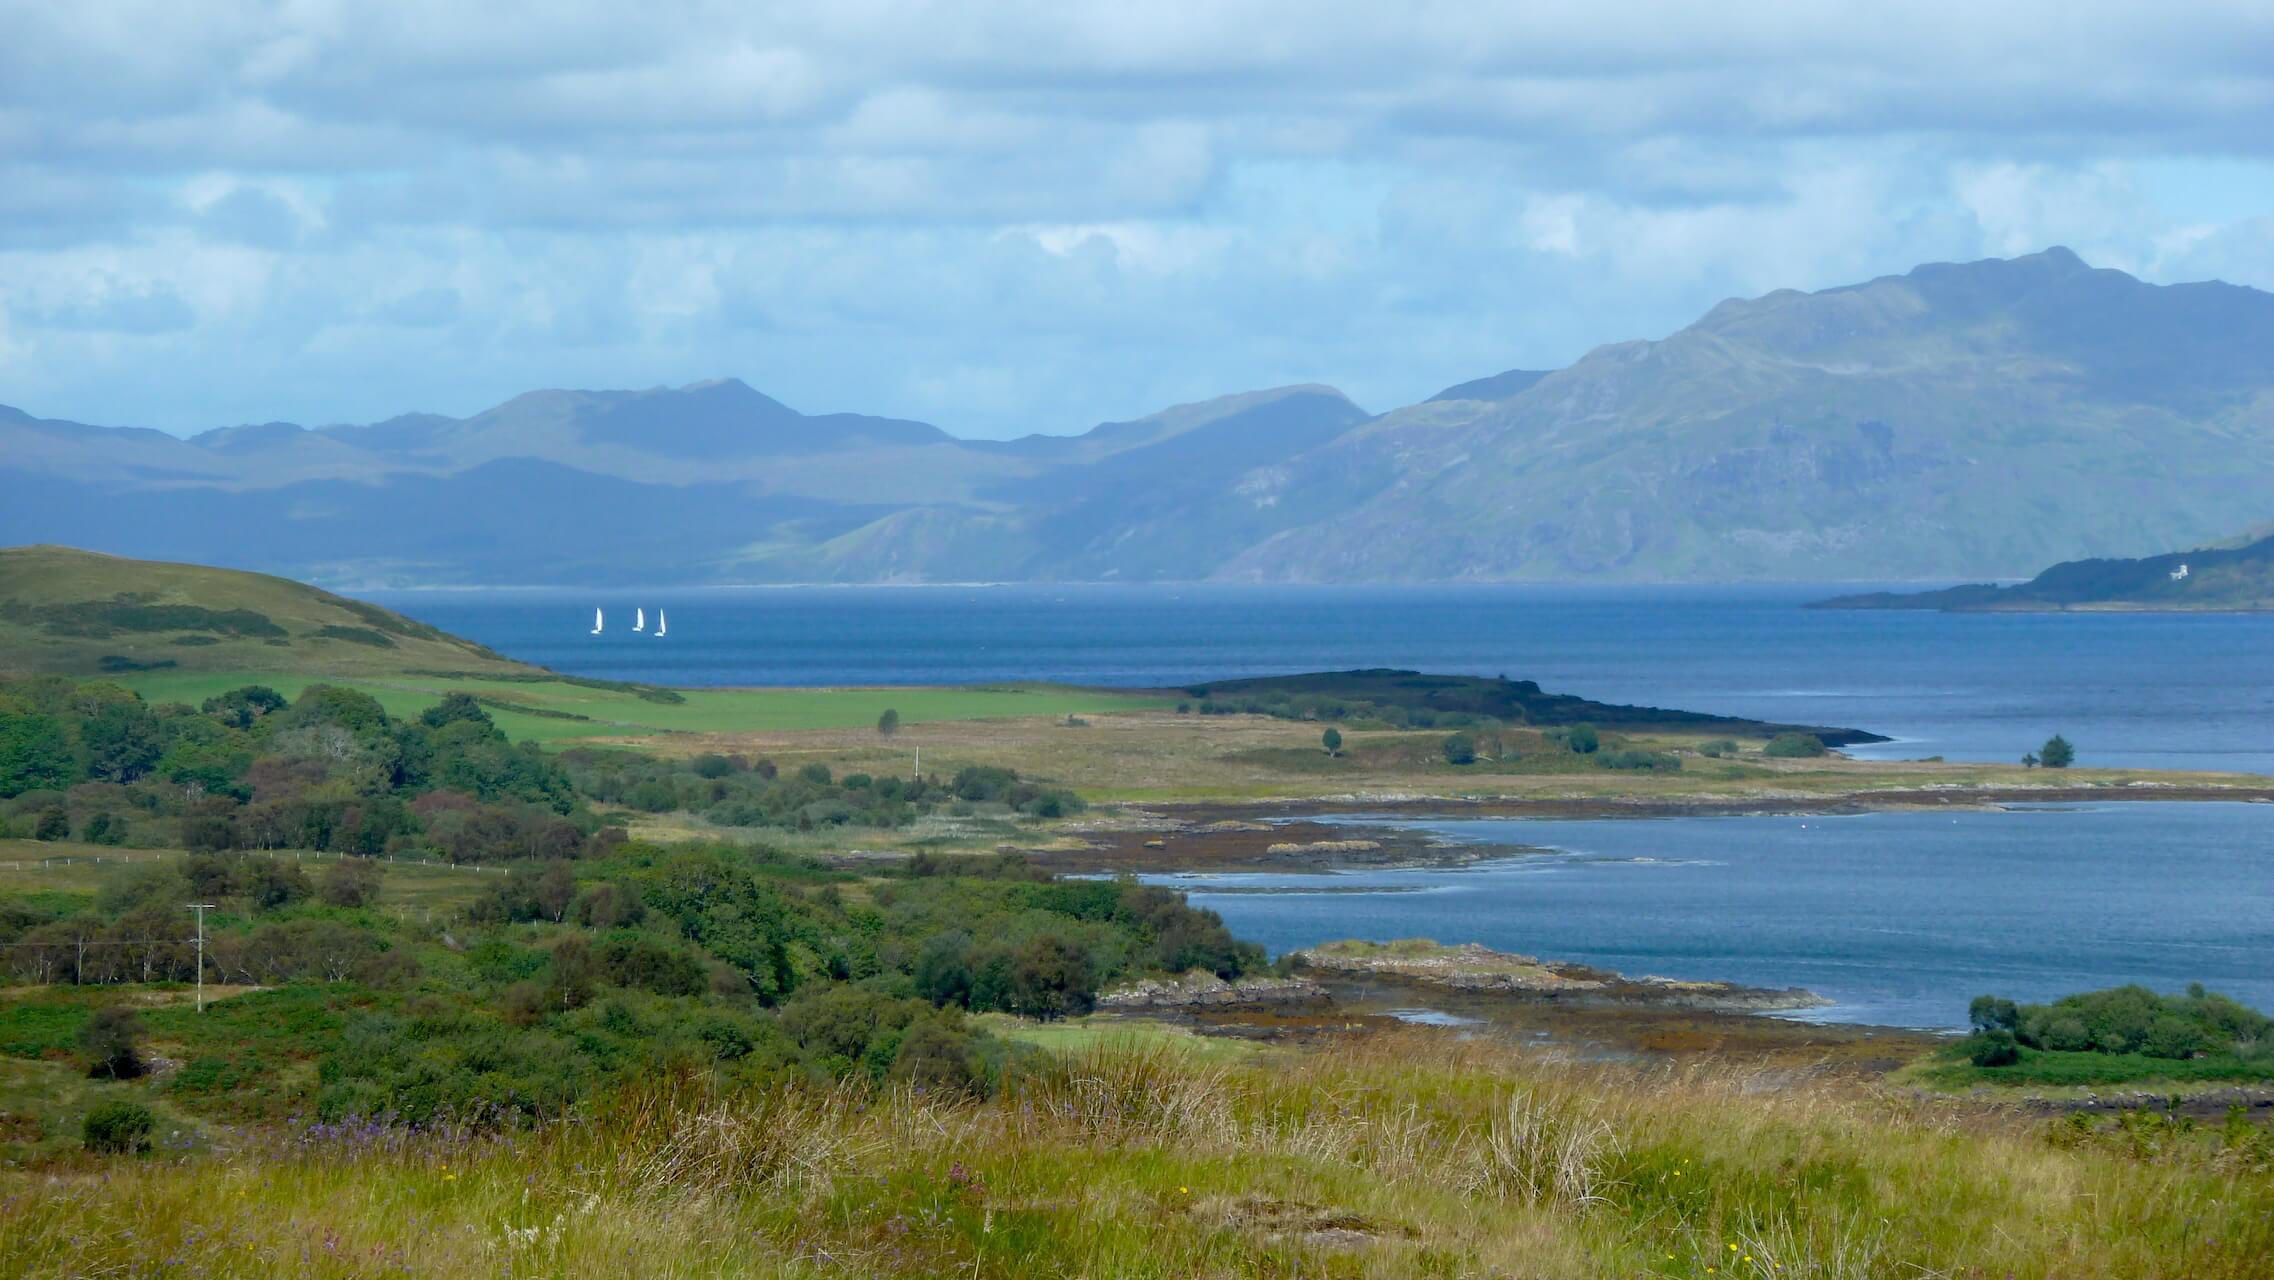 View over the Sound of Mull looking toward the Ardnamurchan Peninsula